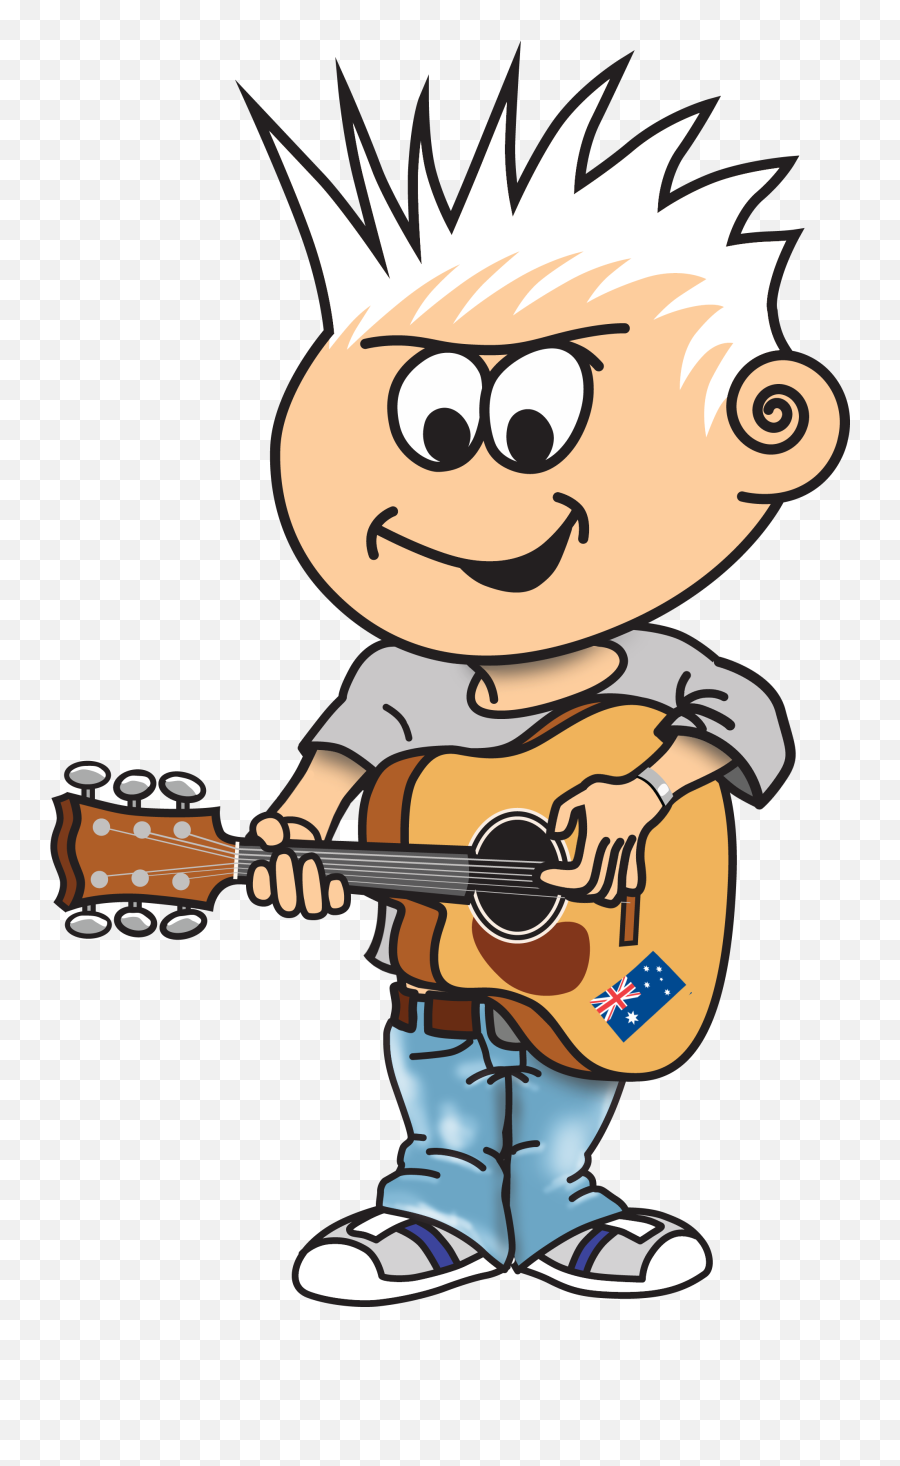 Contact Jon For And Live Music Jjcartoonpng - Musician Music,Live Music Png